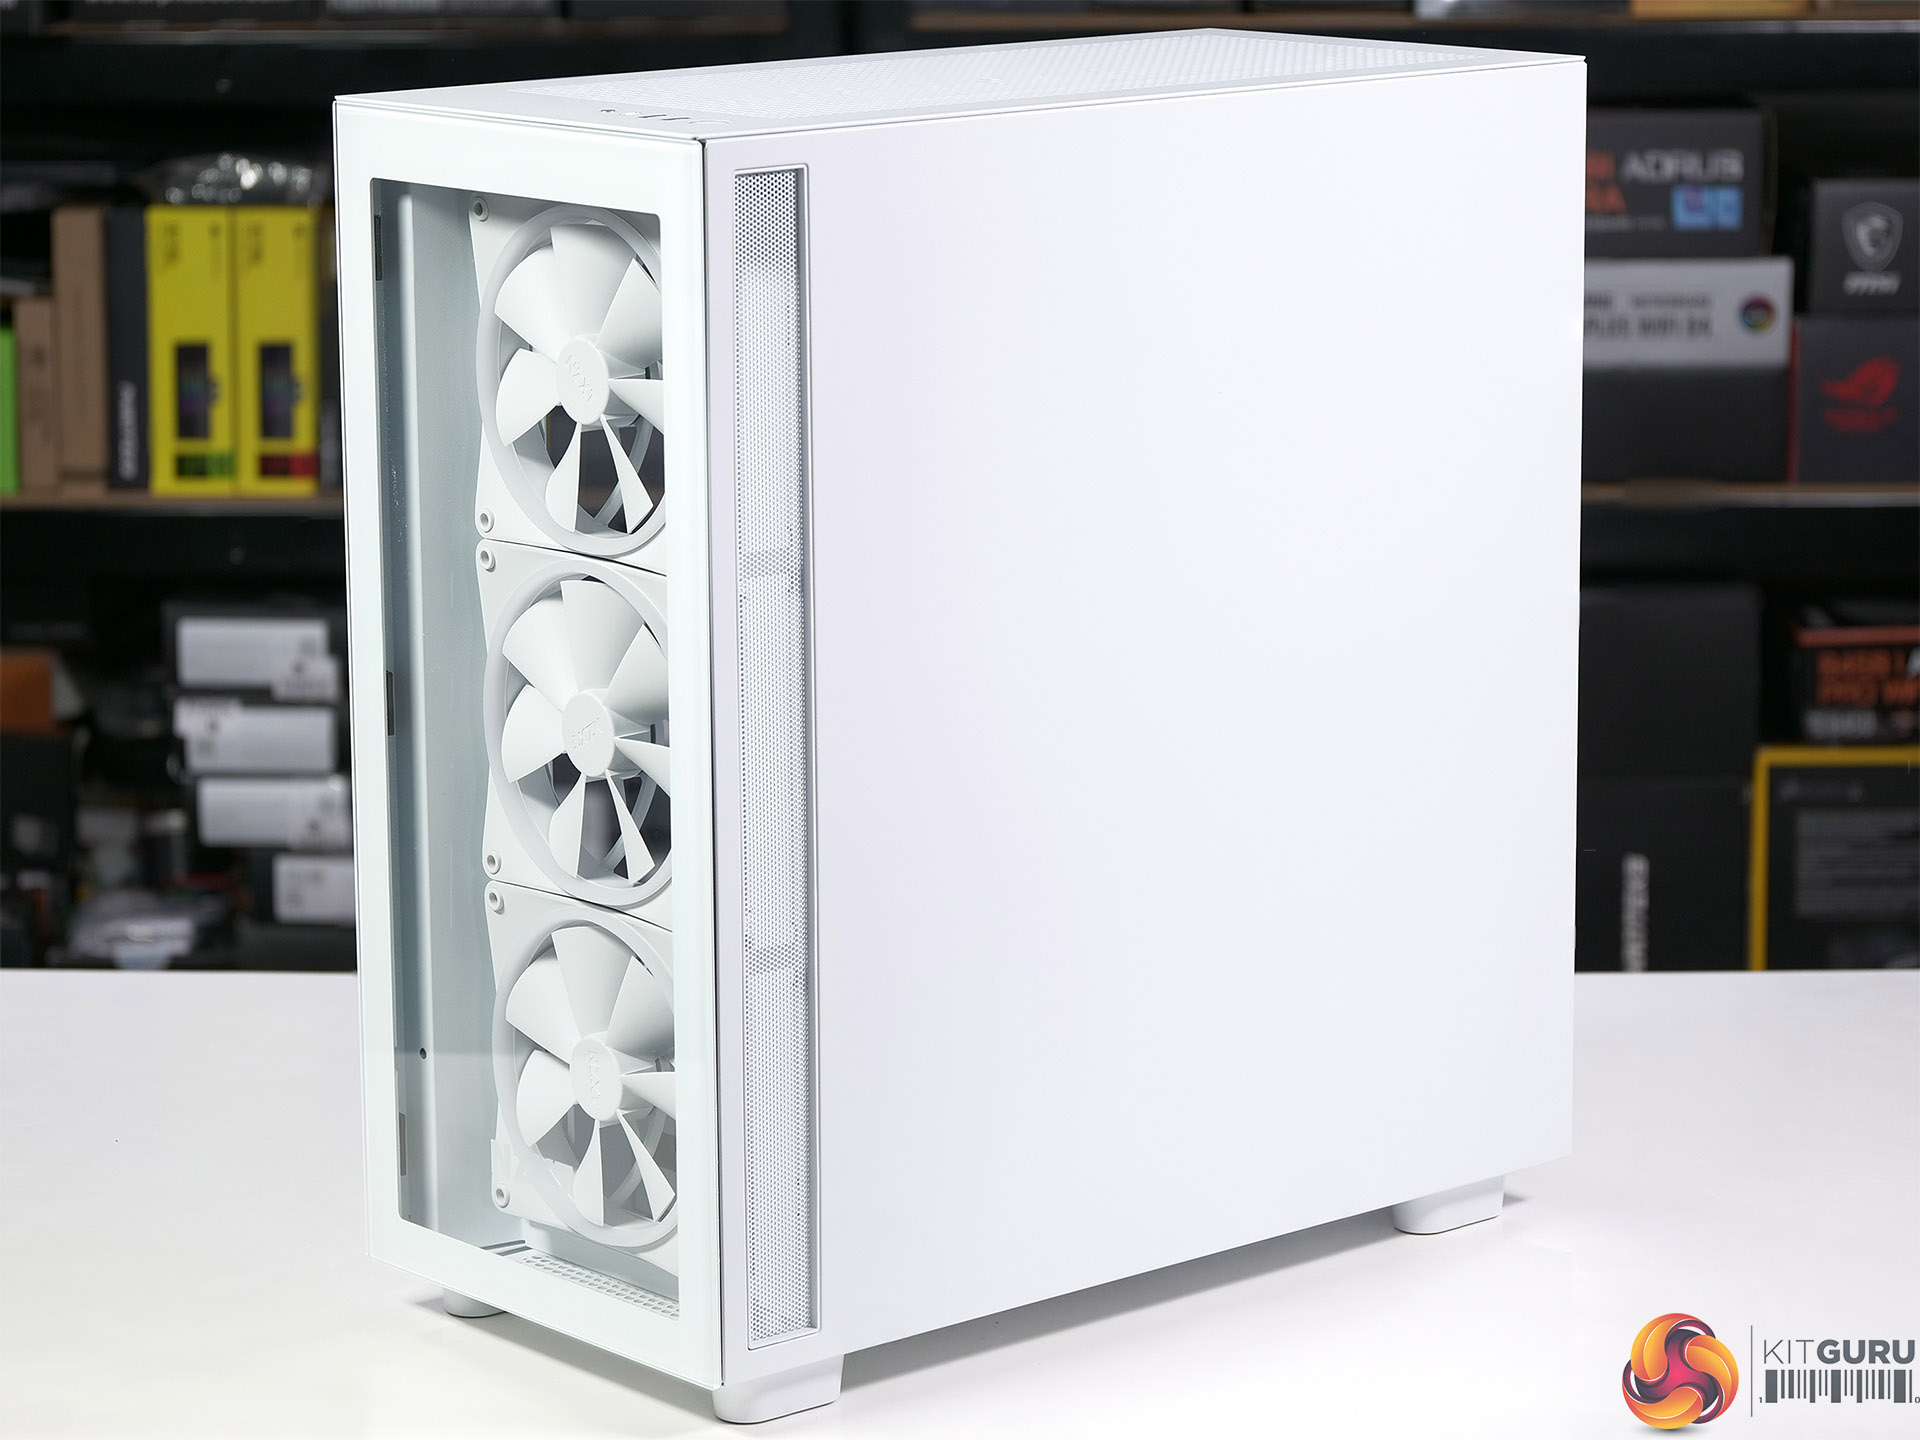 NZXT H7 Review – Go with the Flow